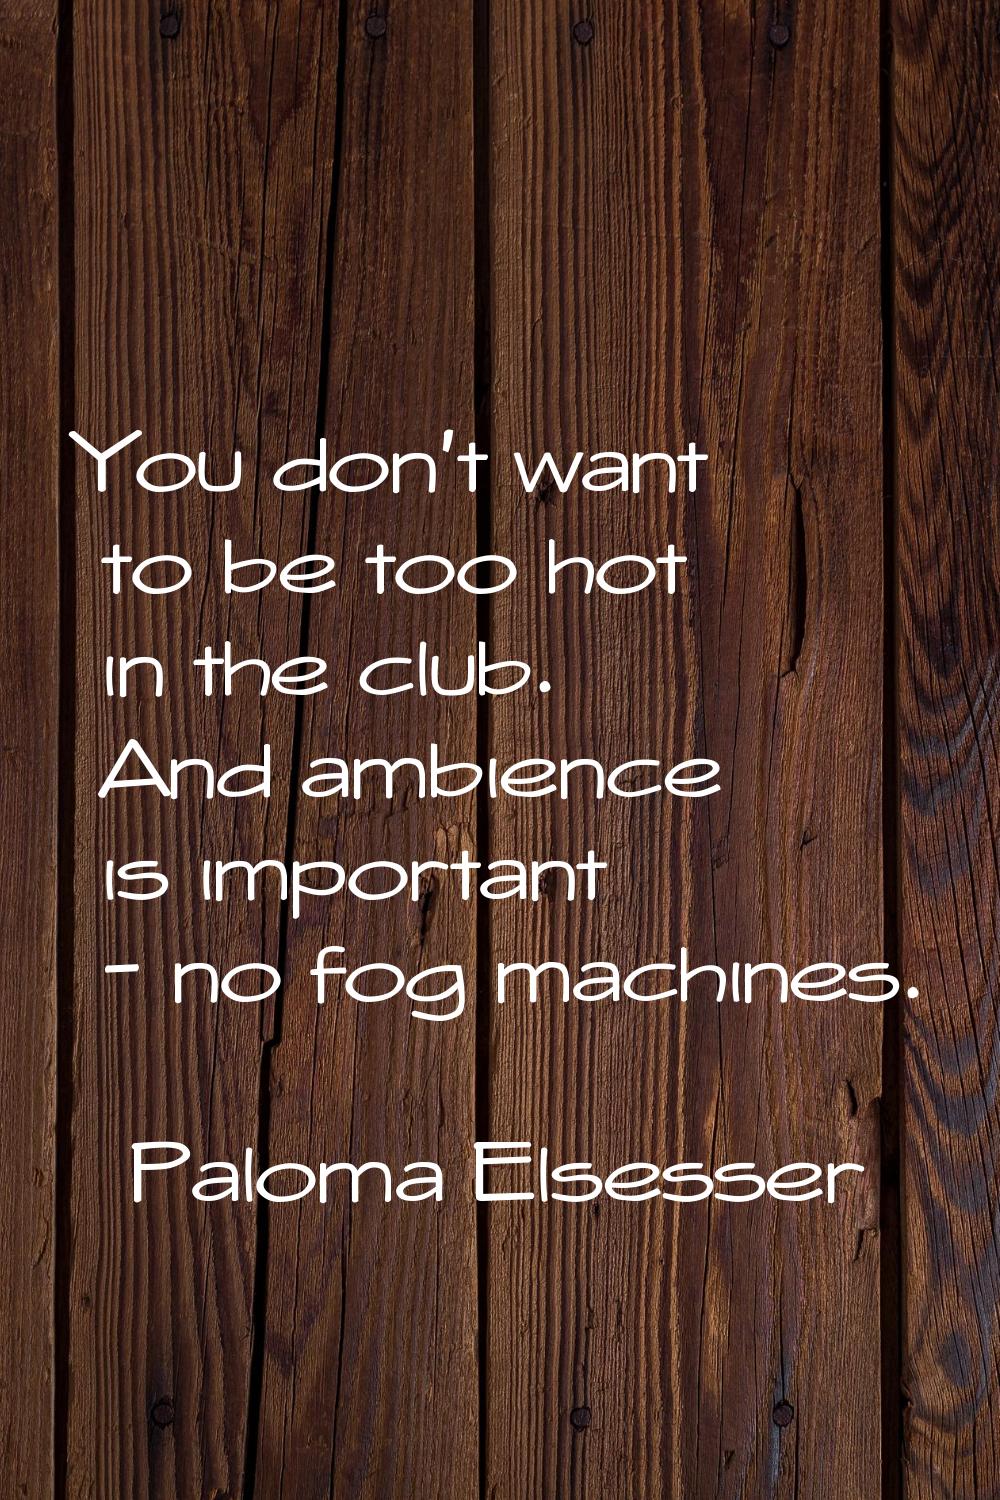 You don't want to be too hot in the club. And ambience is important - no fog machines.